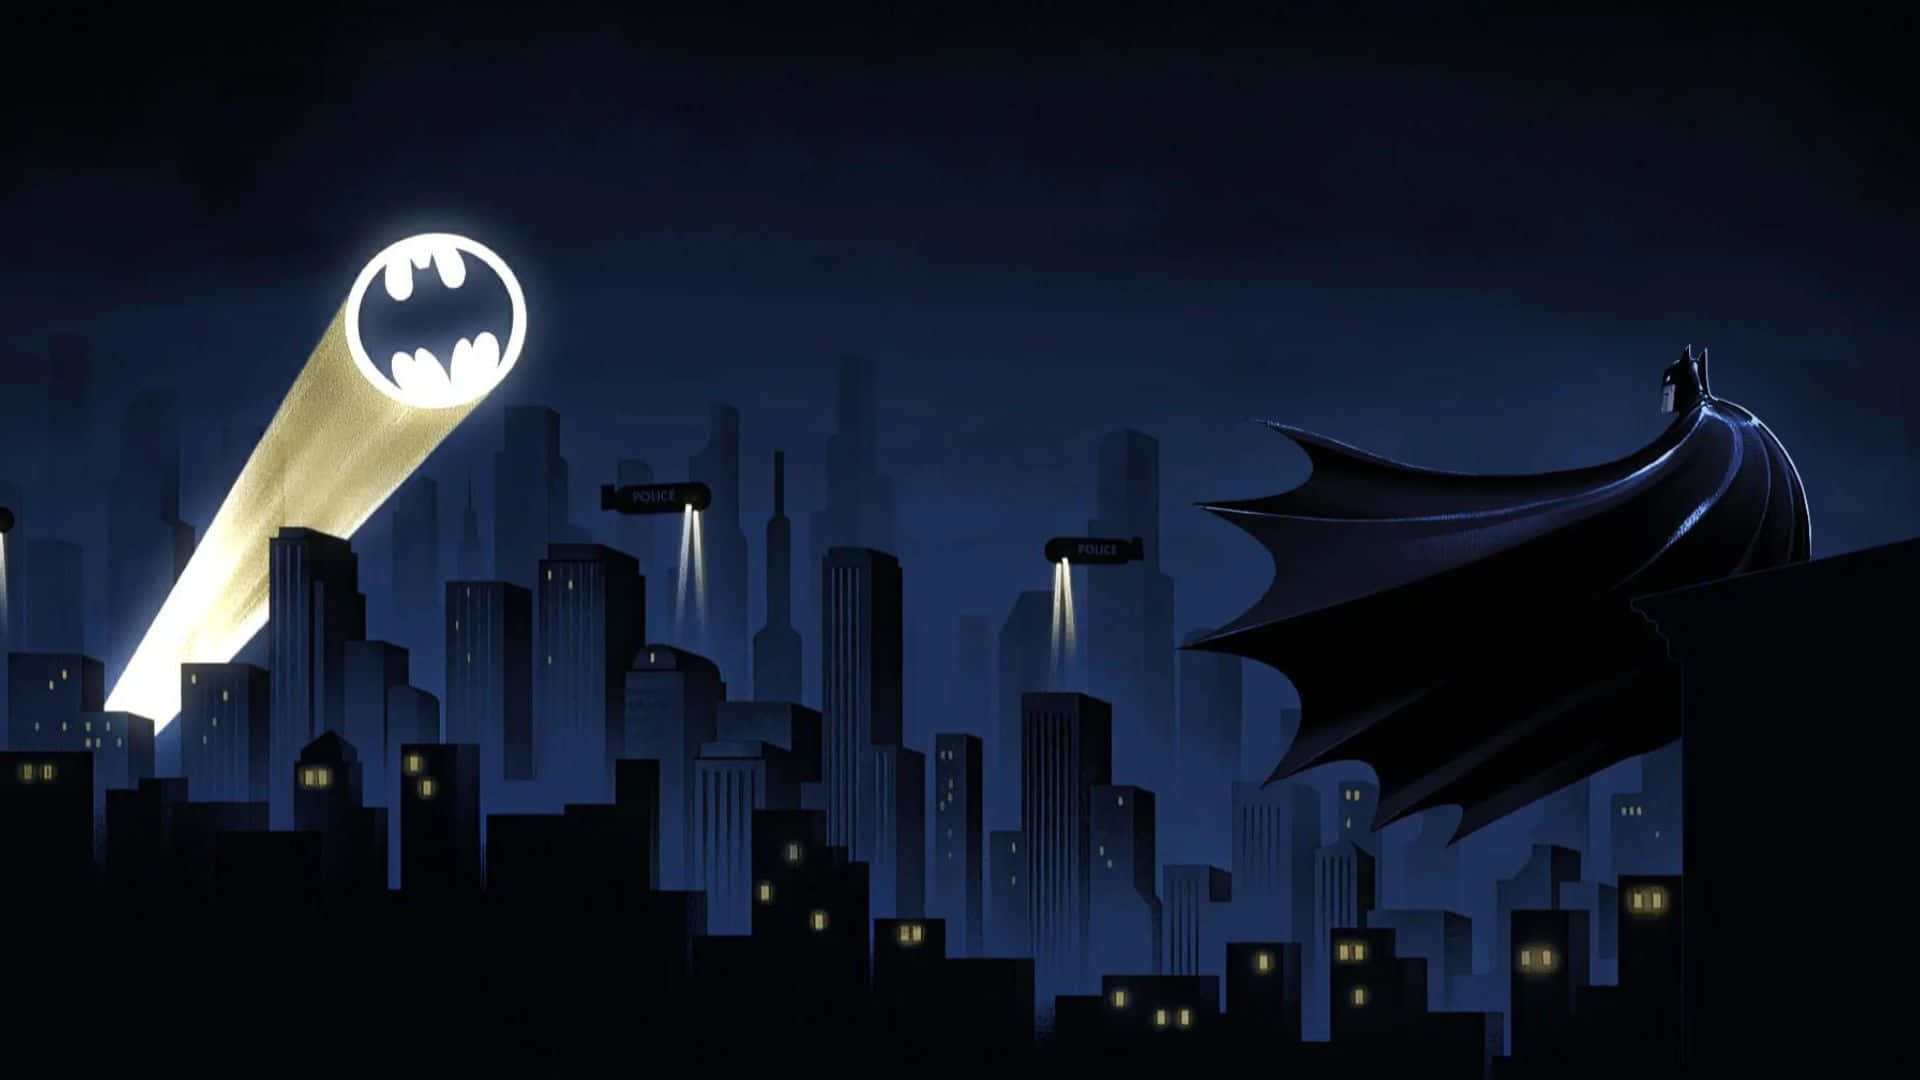 Download The Glowing Bat Signal in the Night Sky Wallpaper | Wallpapers.com